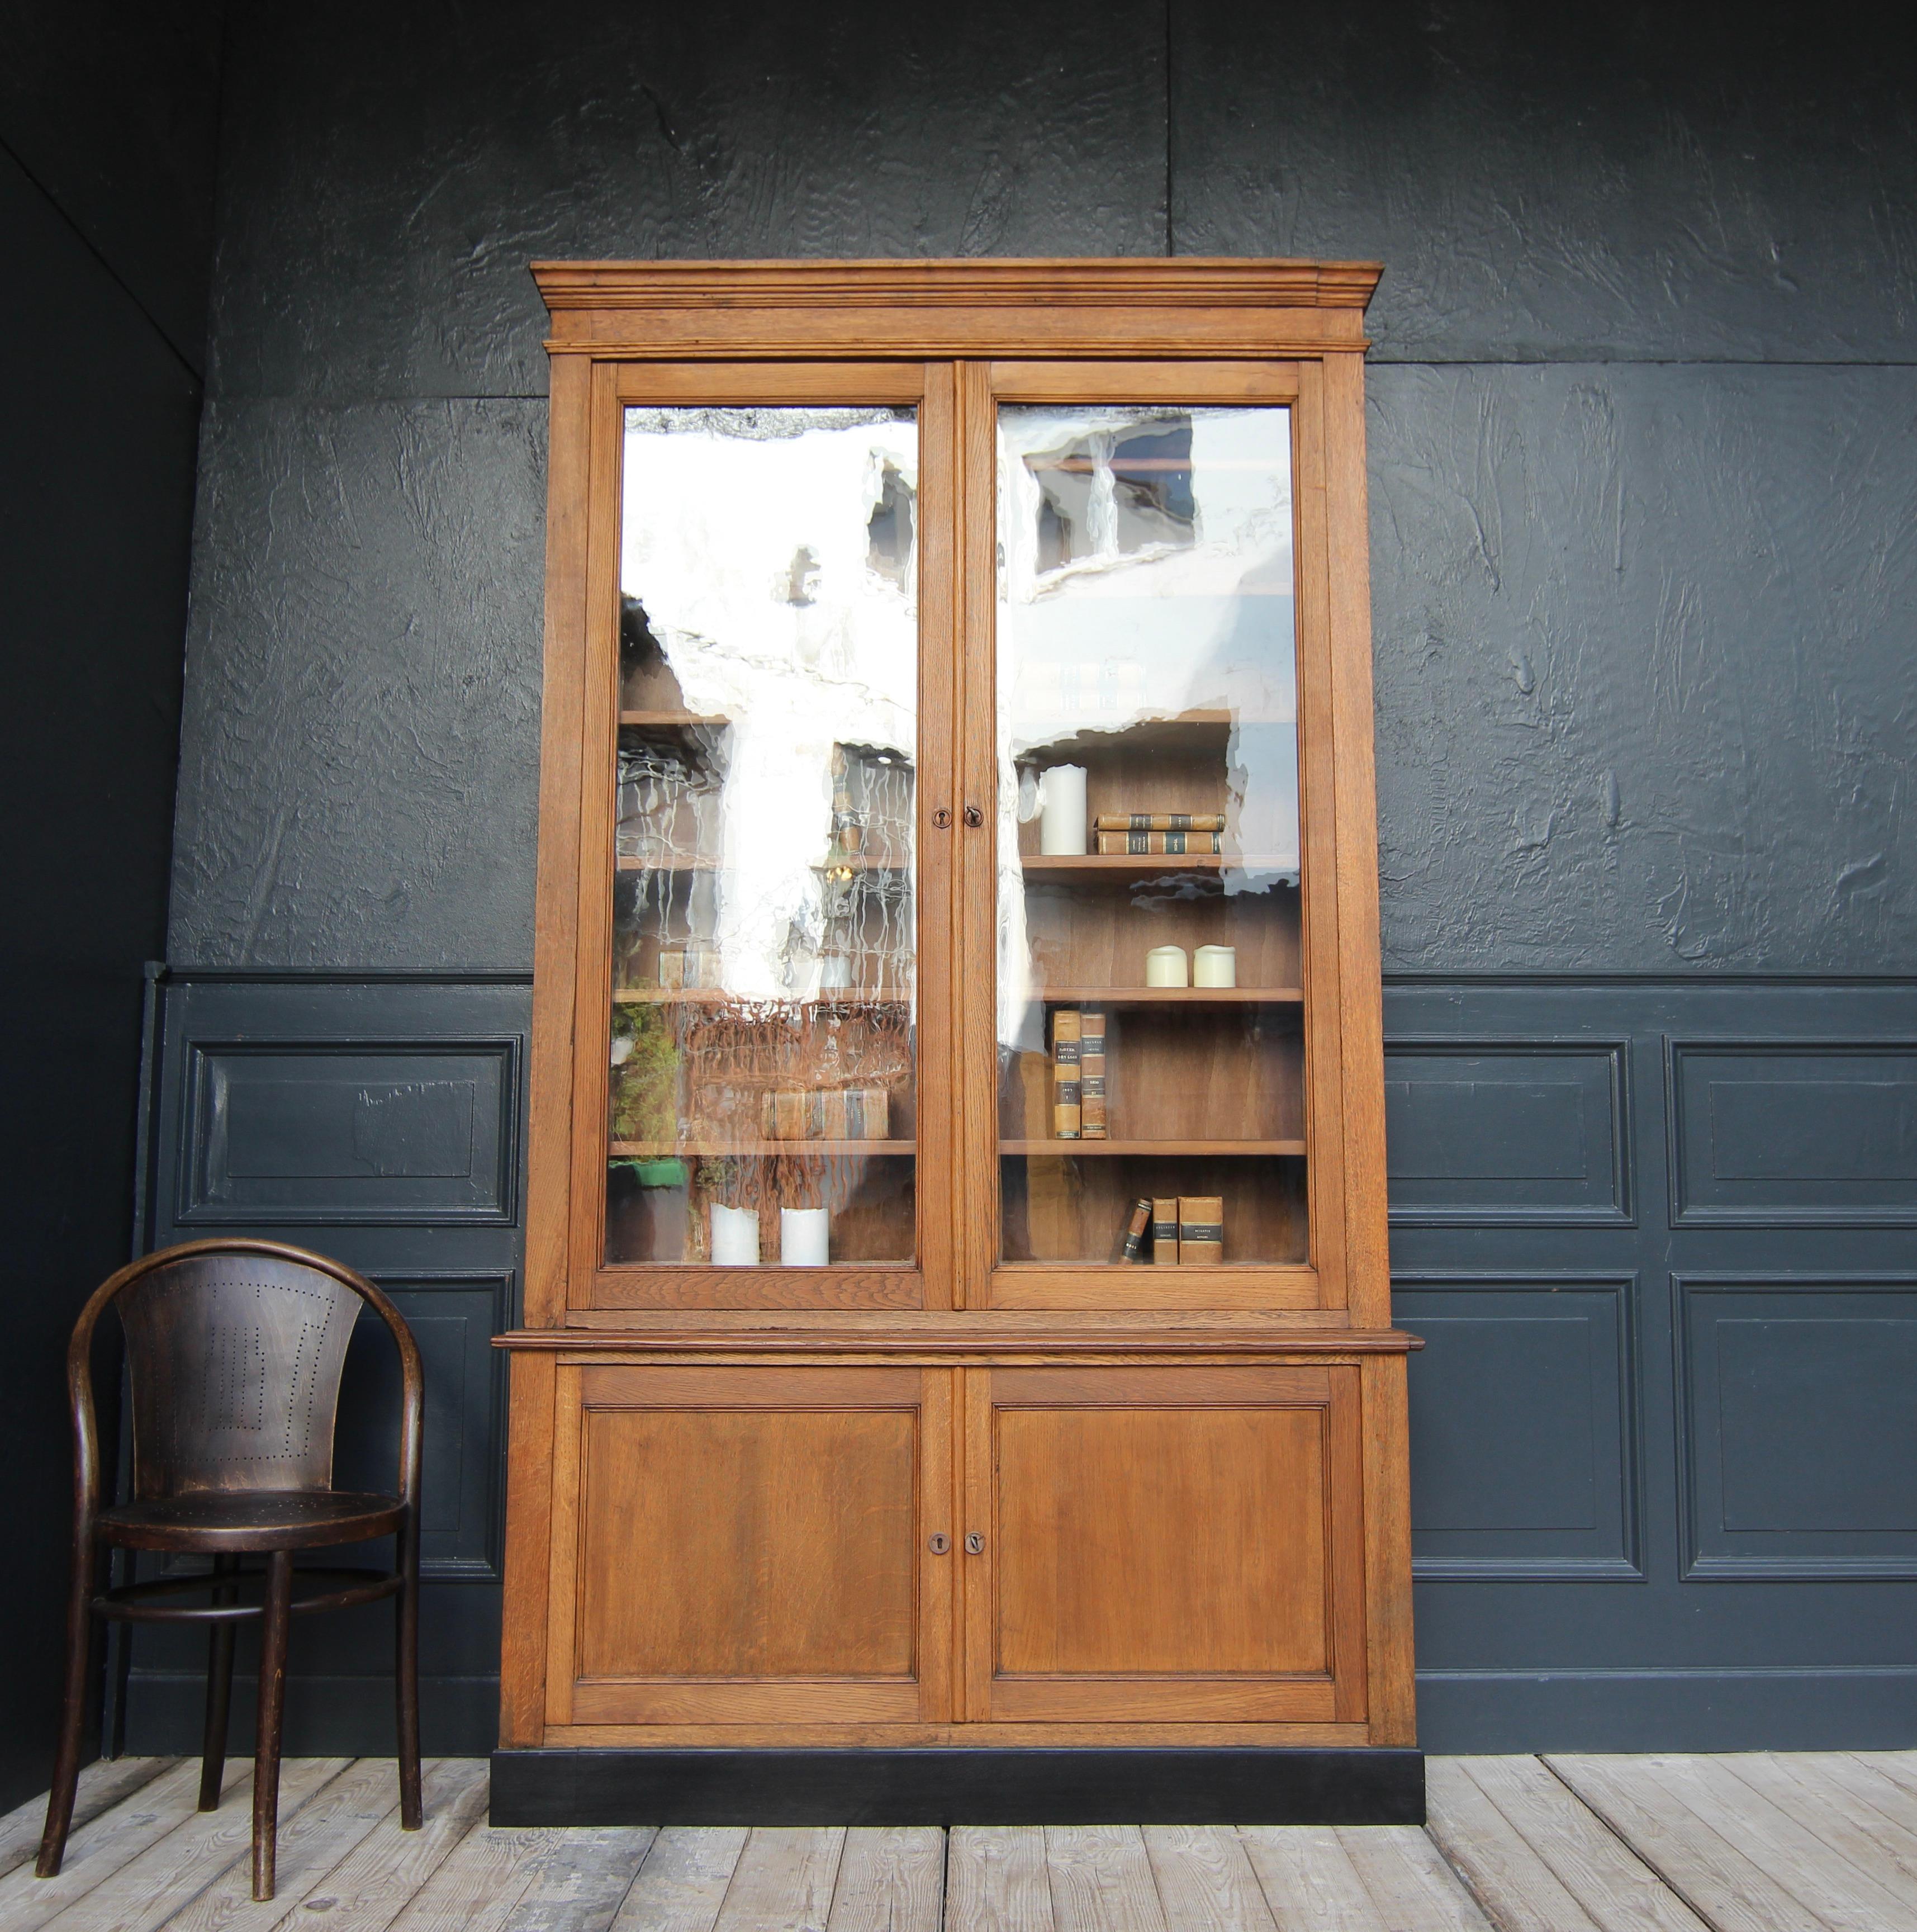 French bookcase or display cabinet from the shop fittings of a pharmacy. Around 1910.

A rare original in a classic timeless design with great proportions.

Straight-lined four-door body in oak and poplar wood, consisting of a base cabinet standing